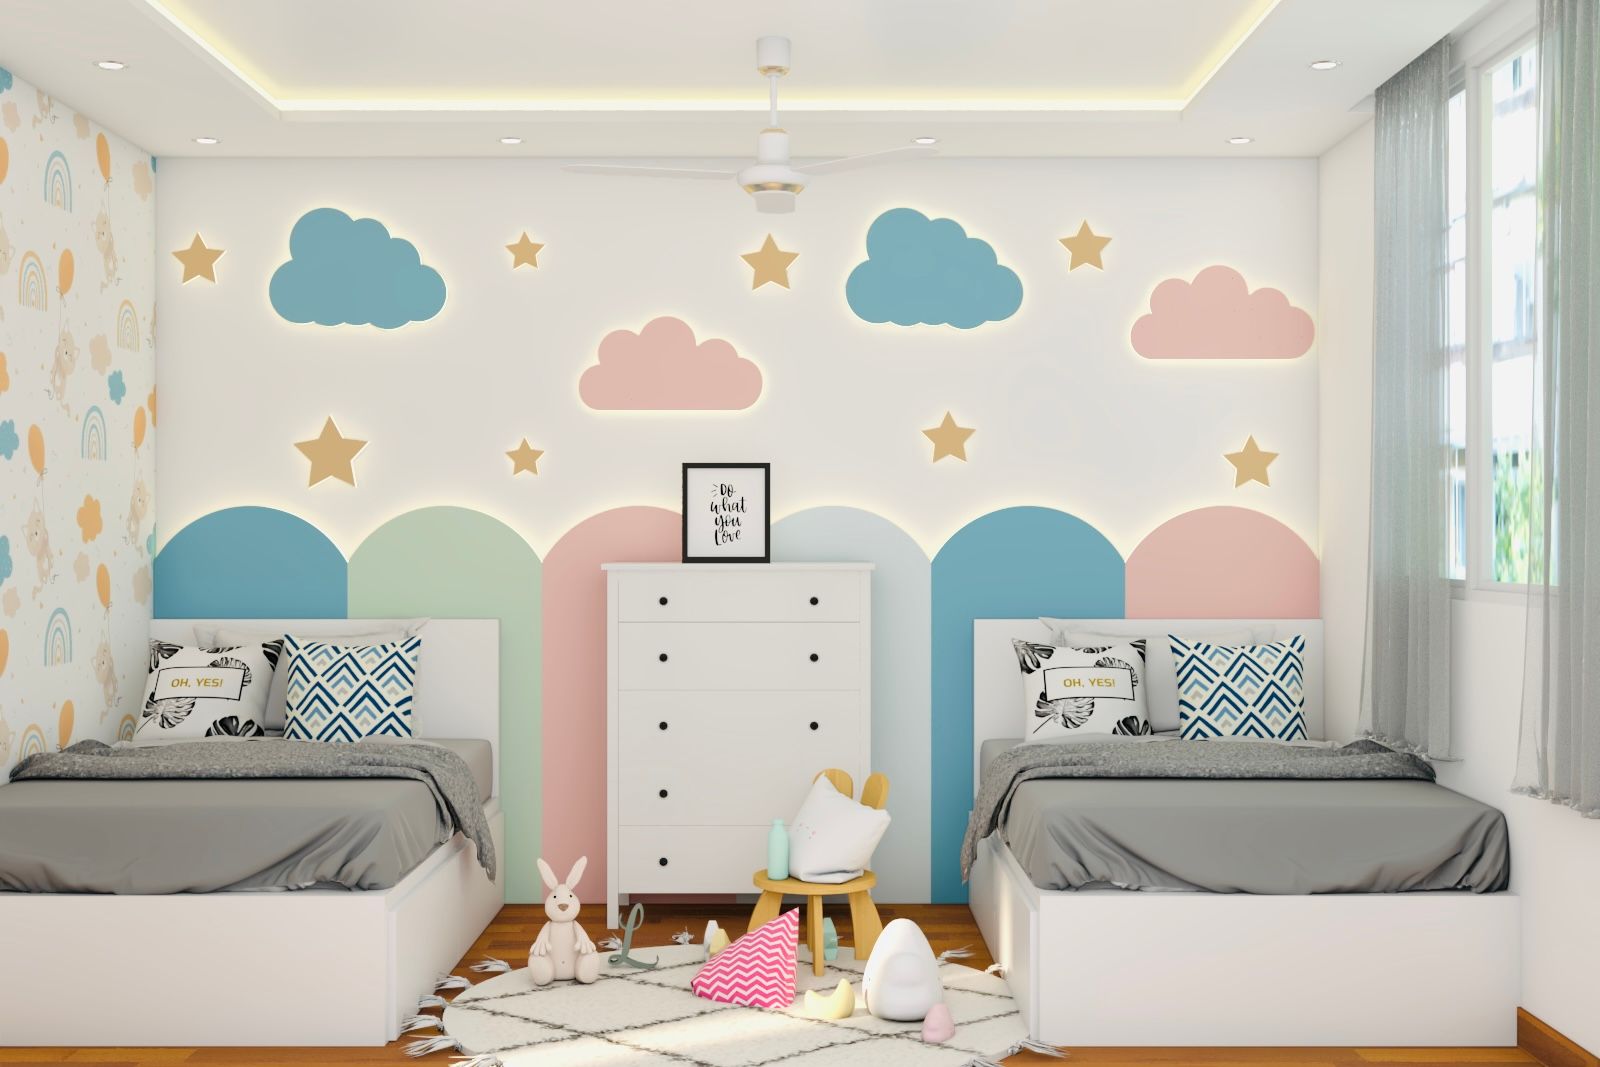 Modern Kids Bedroom Design With Two Single Beds